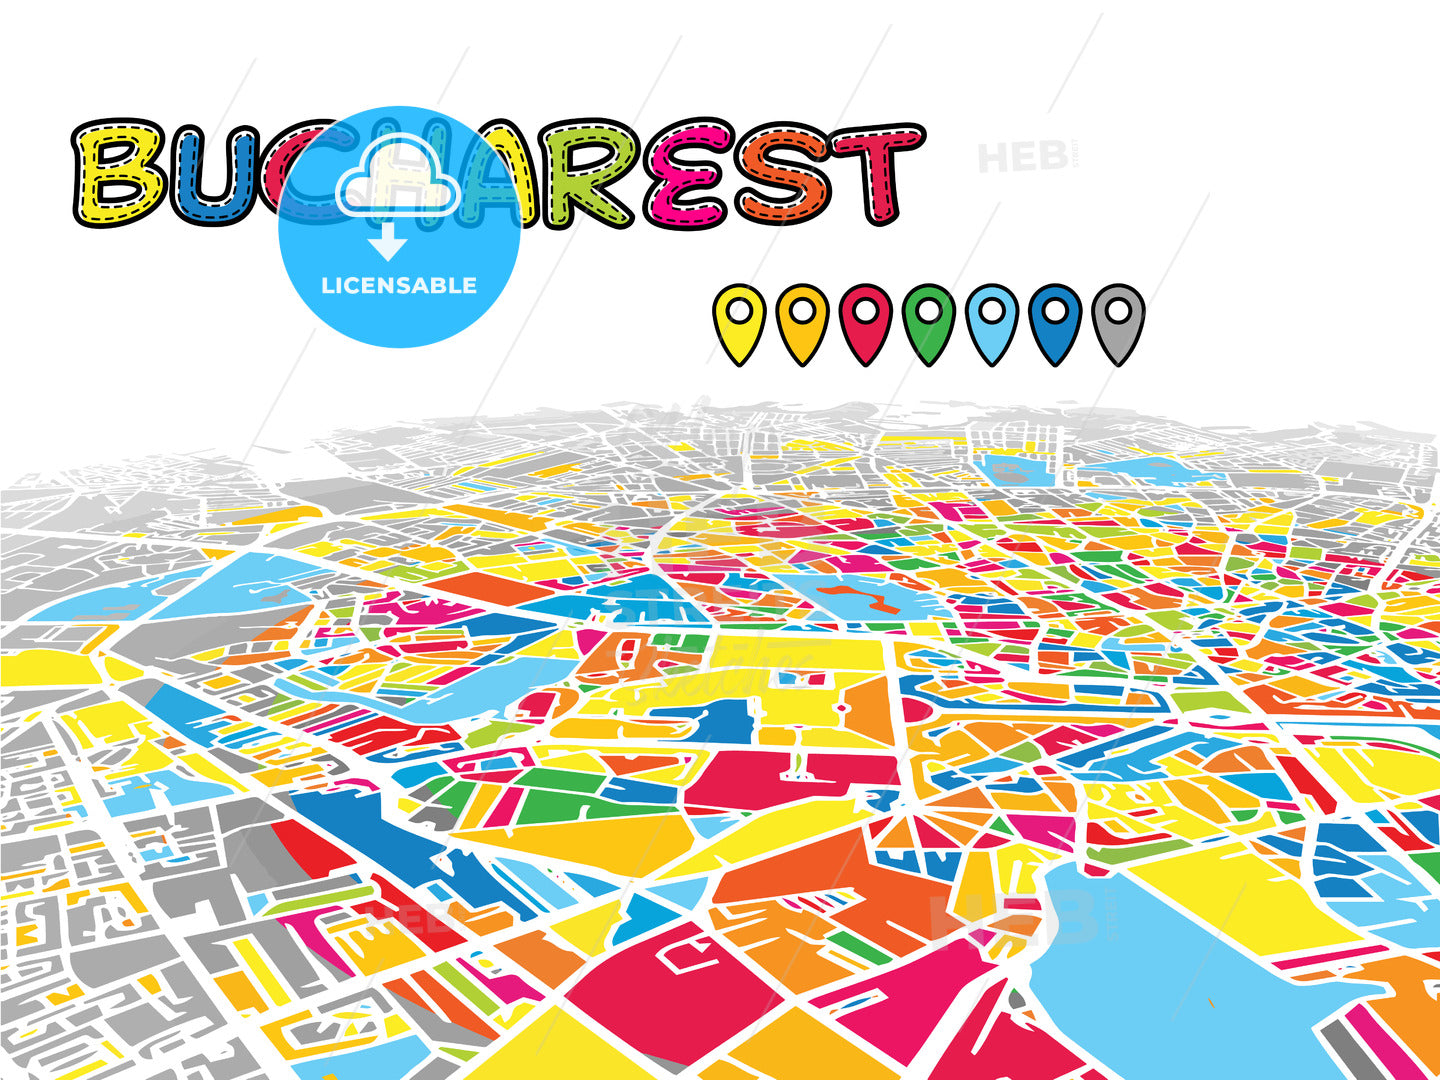 Bucharest, Romania, downtown map in perspective